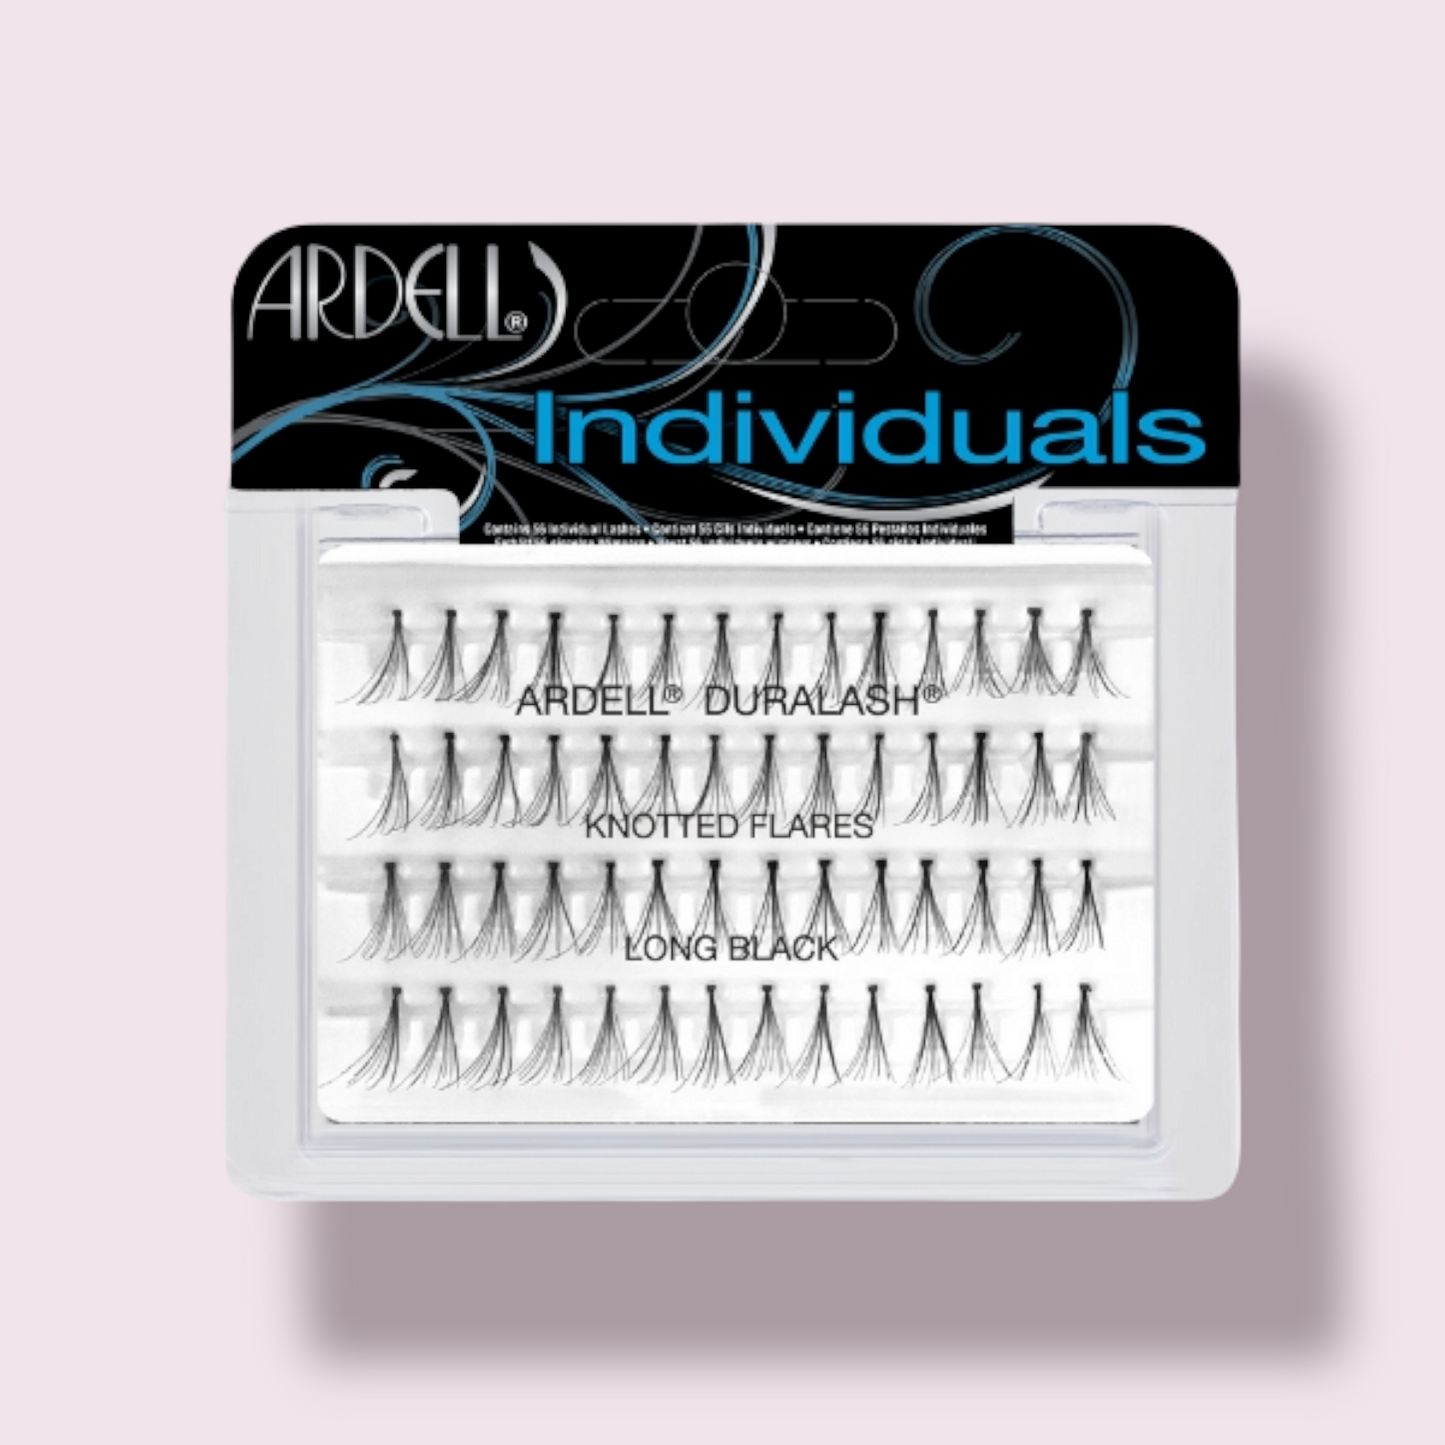 Ardell - Duralash Flare Individuals Knotted Long Blk